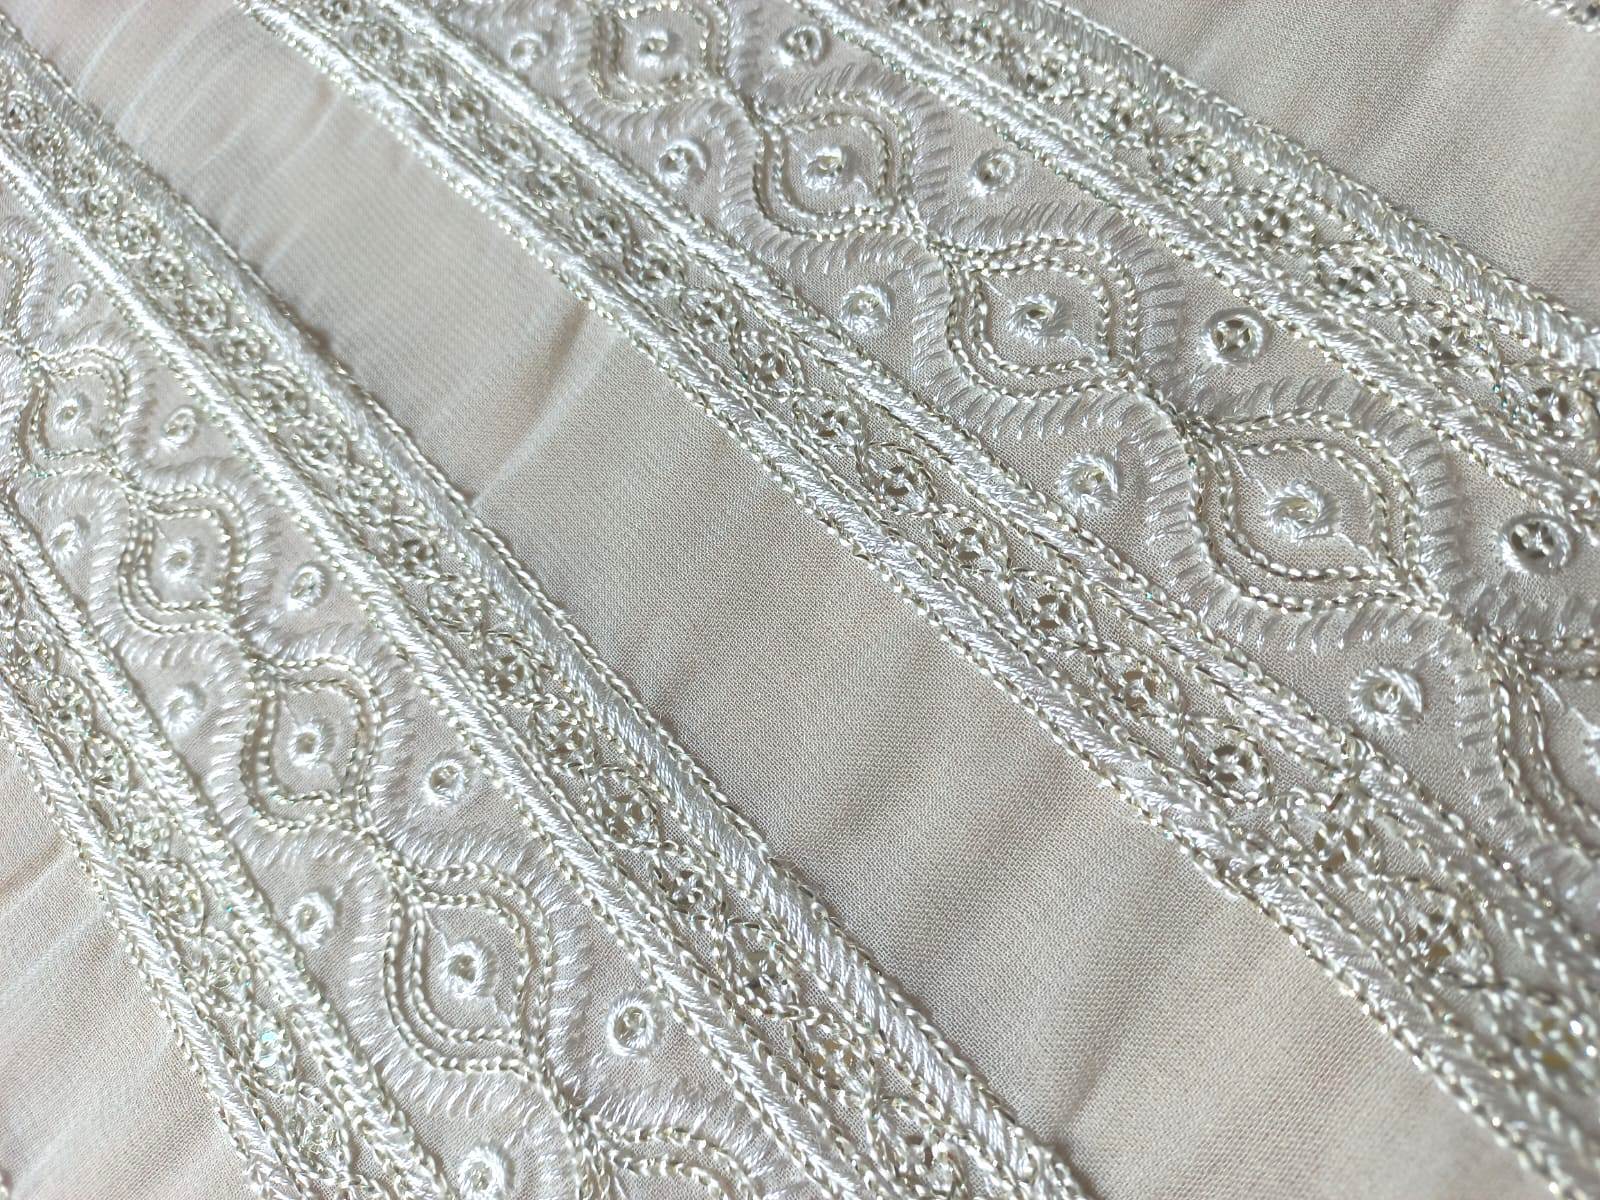 Embroidered Chain Stitch Lace Fabric